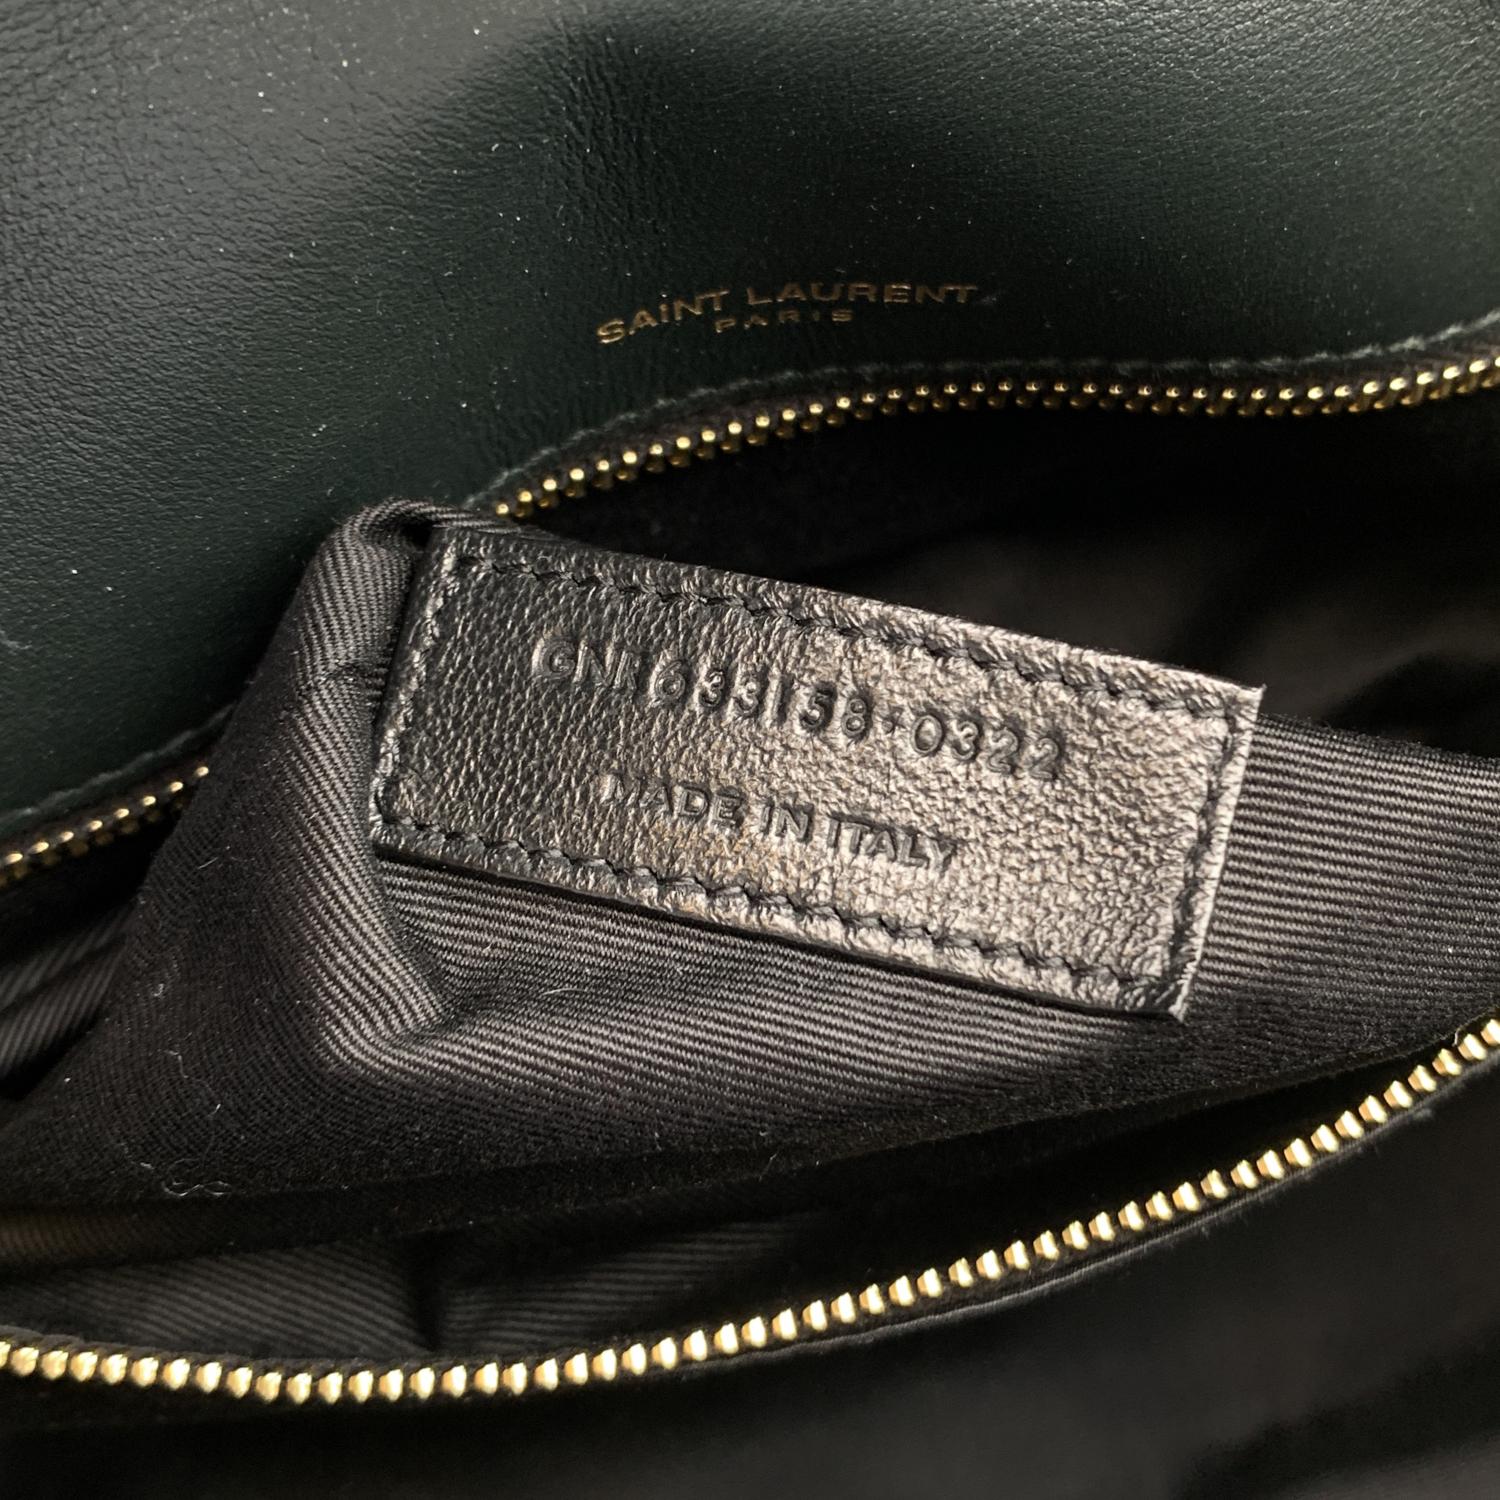 serial number authentic ysl bag inside